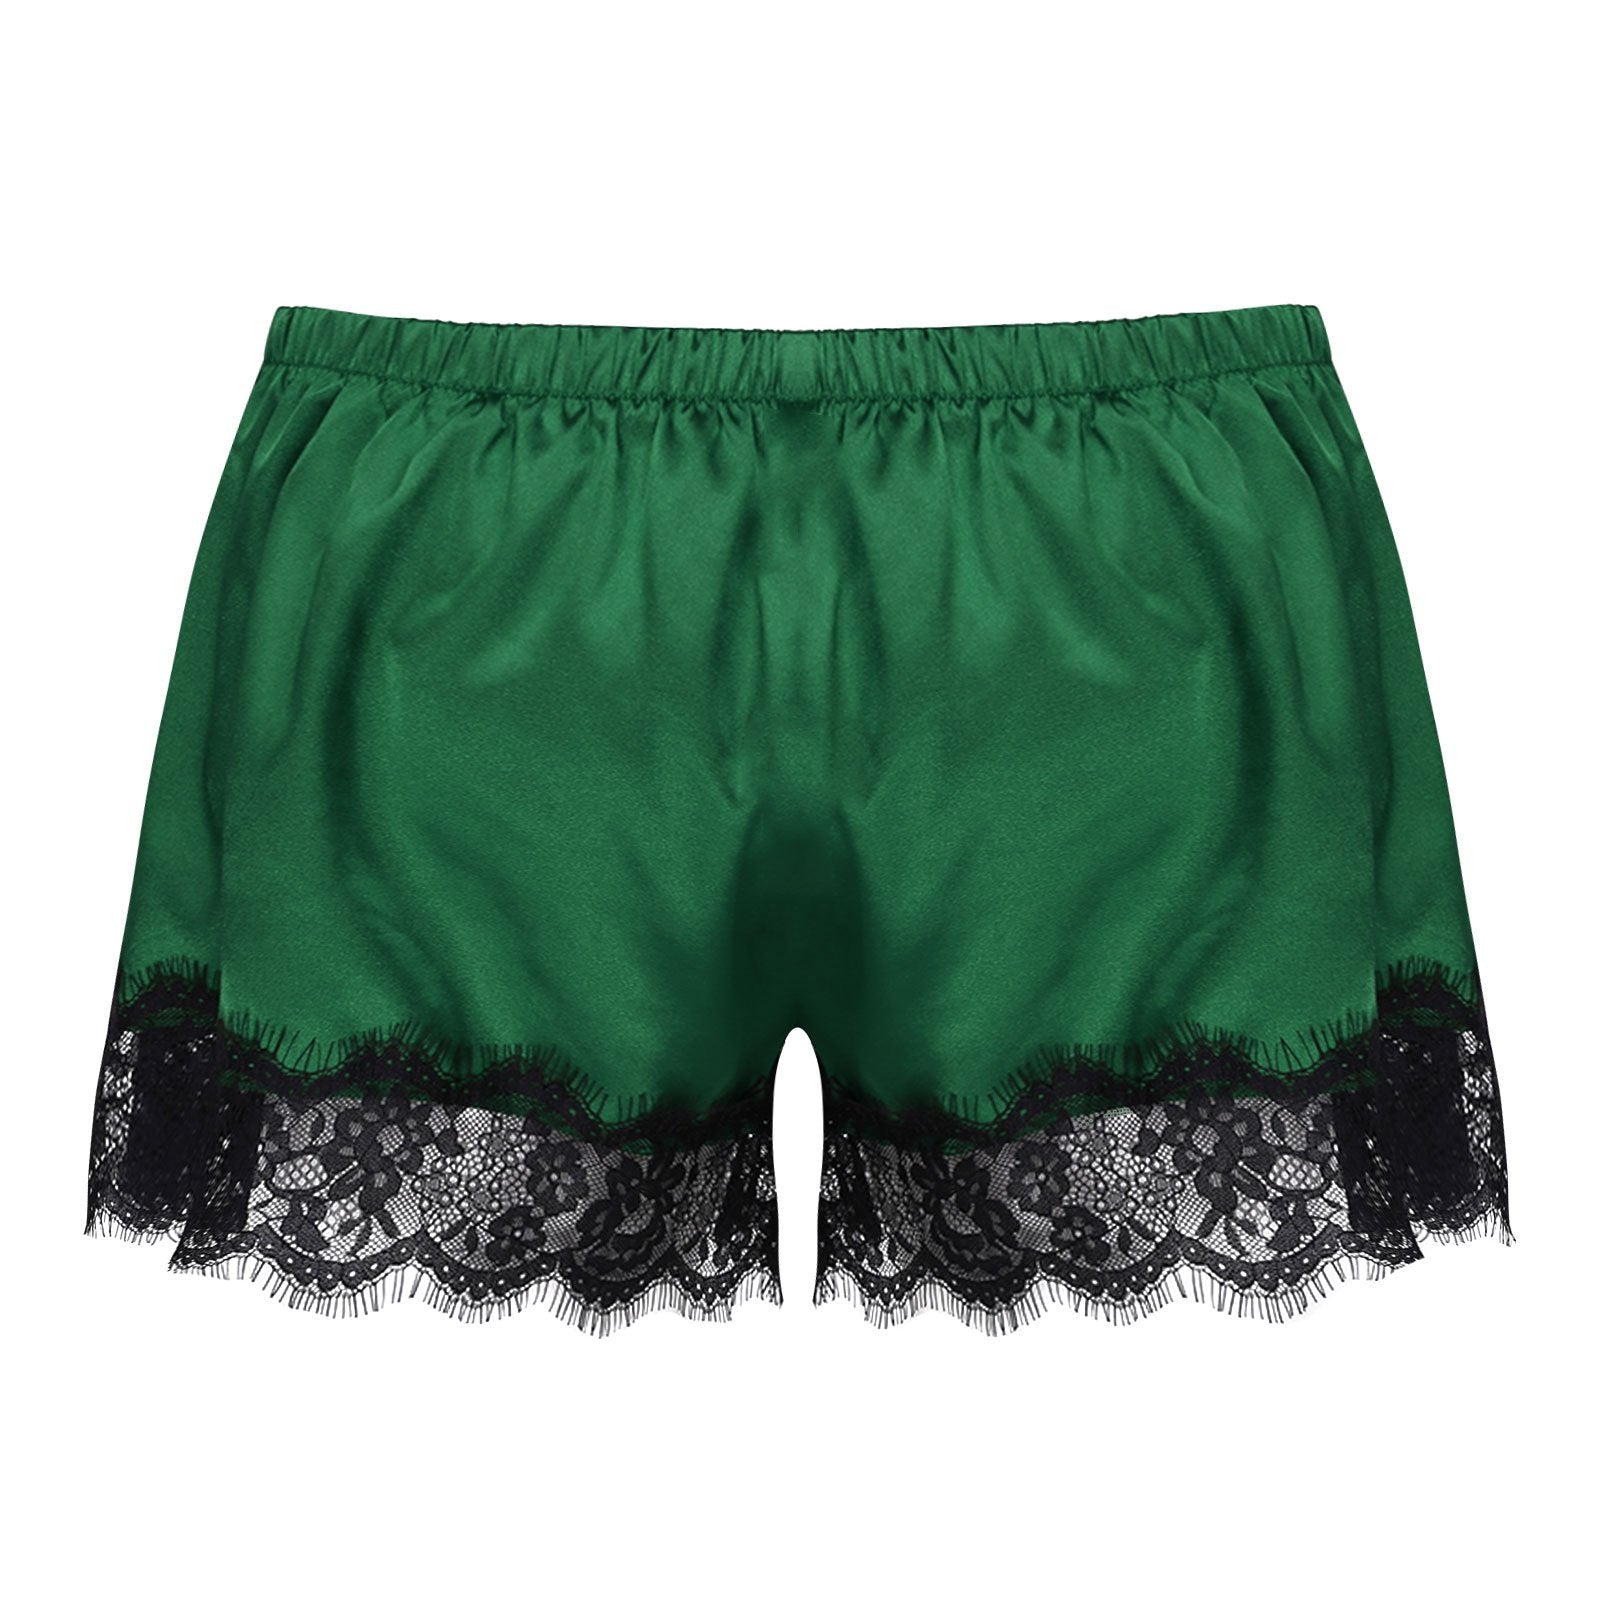 Mens Sissy Silky Satin Boxer Shorts with Lace Green